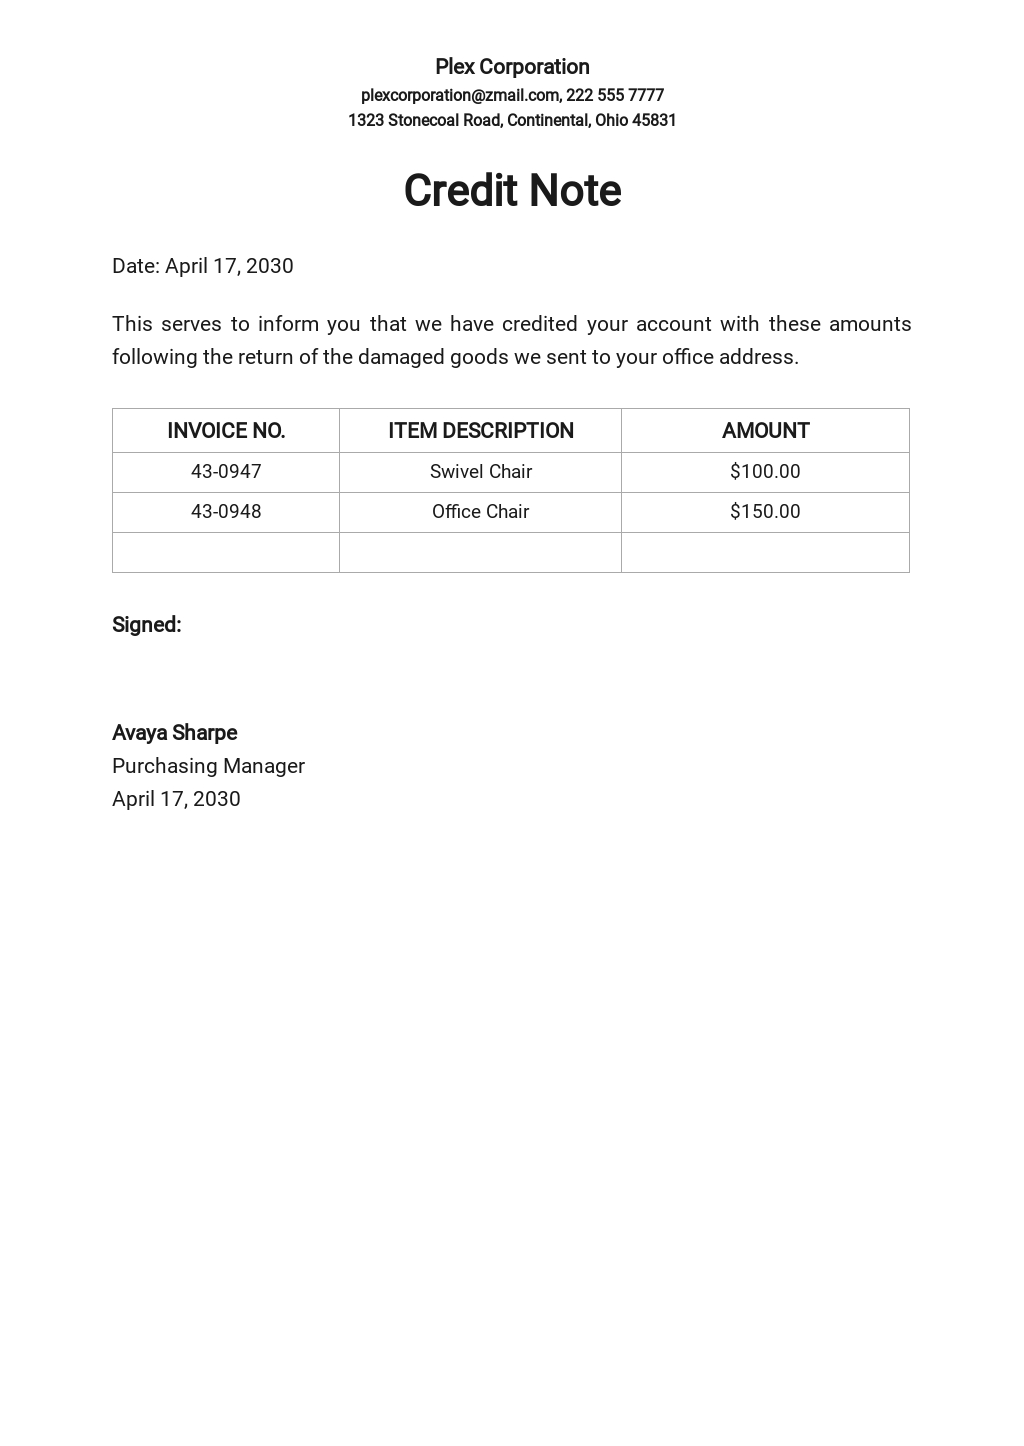 Credit Note format Template - Google Docs, Google Sheets, Excel, Word, Apple Numbers, Apple Pages, PDF